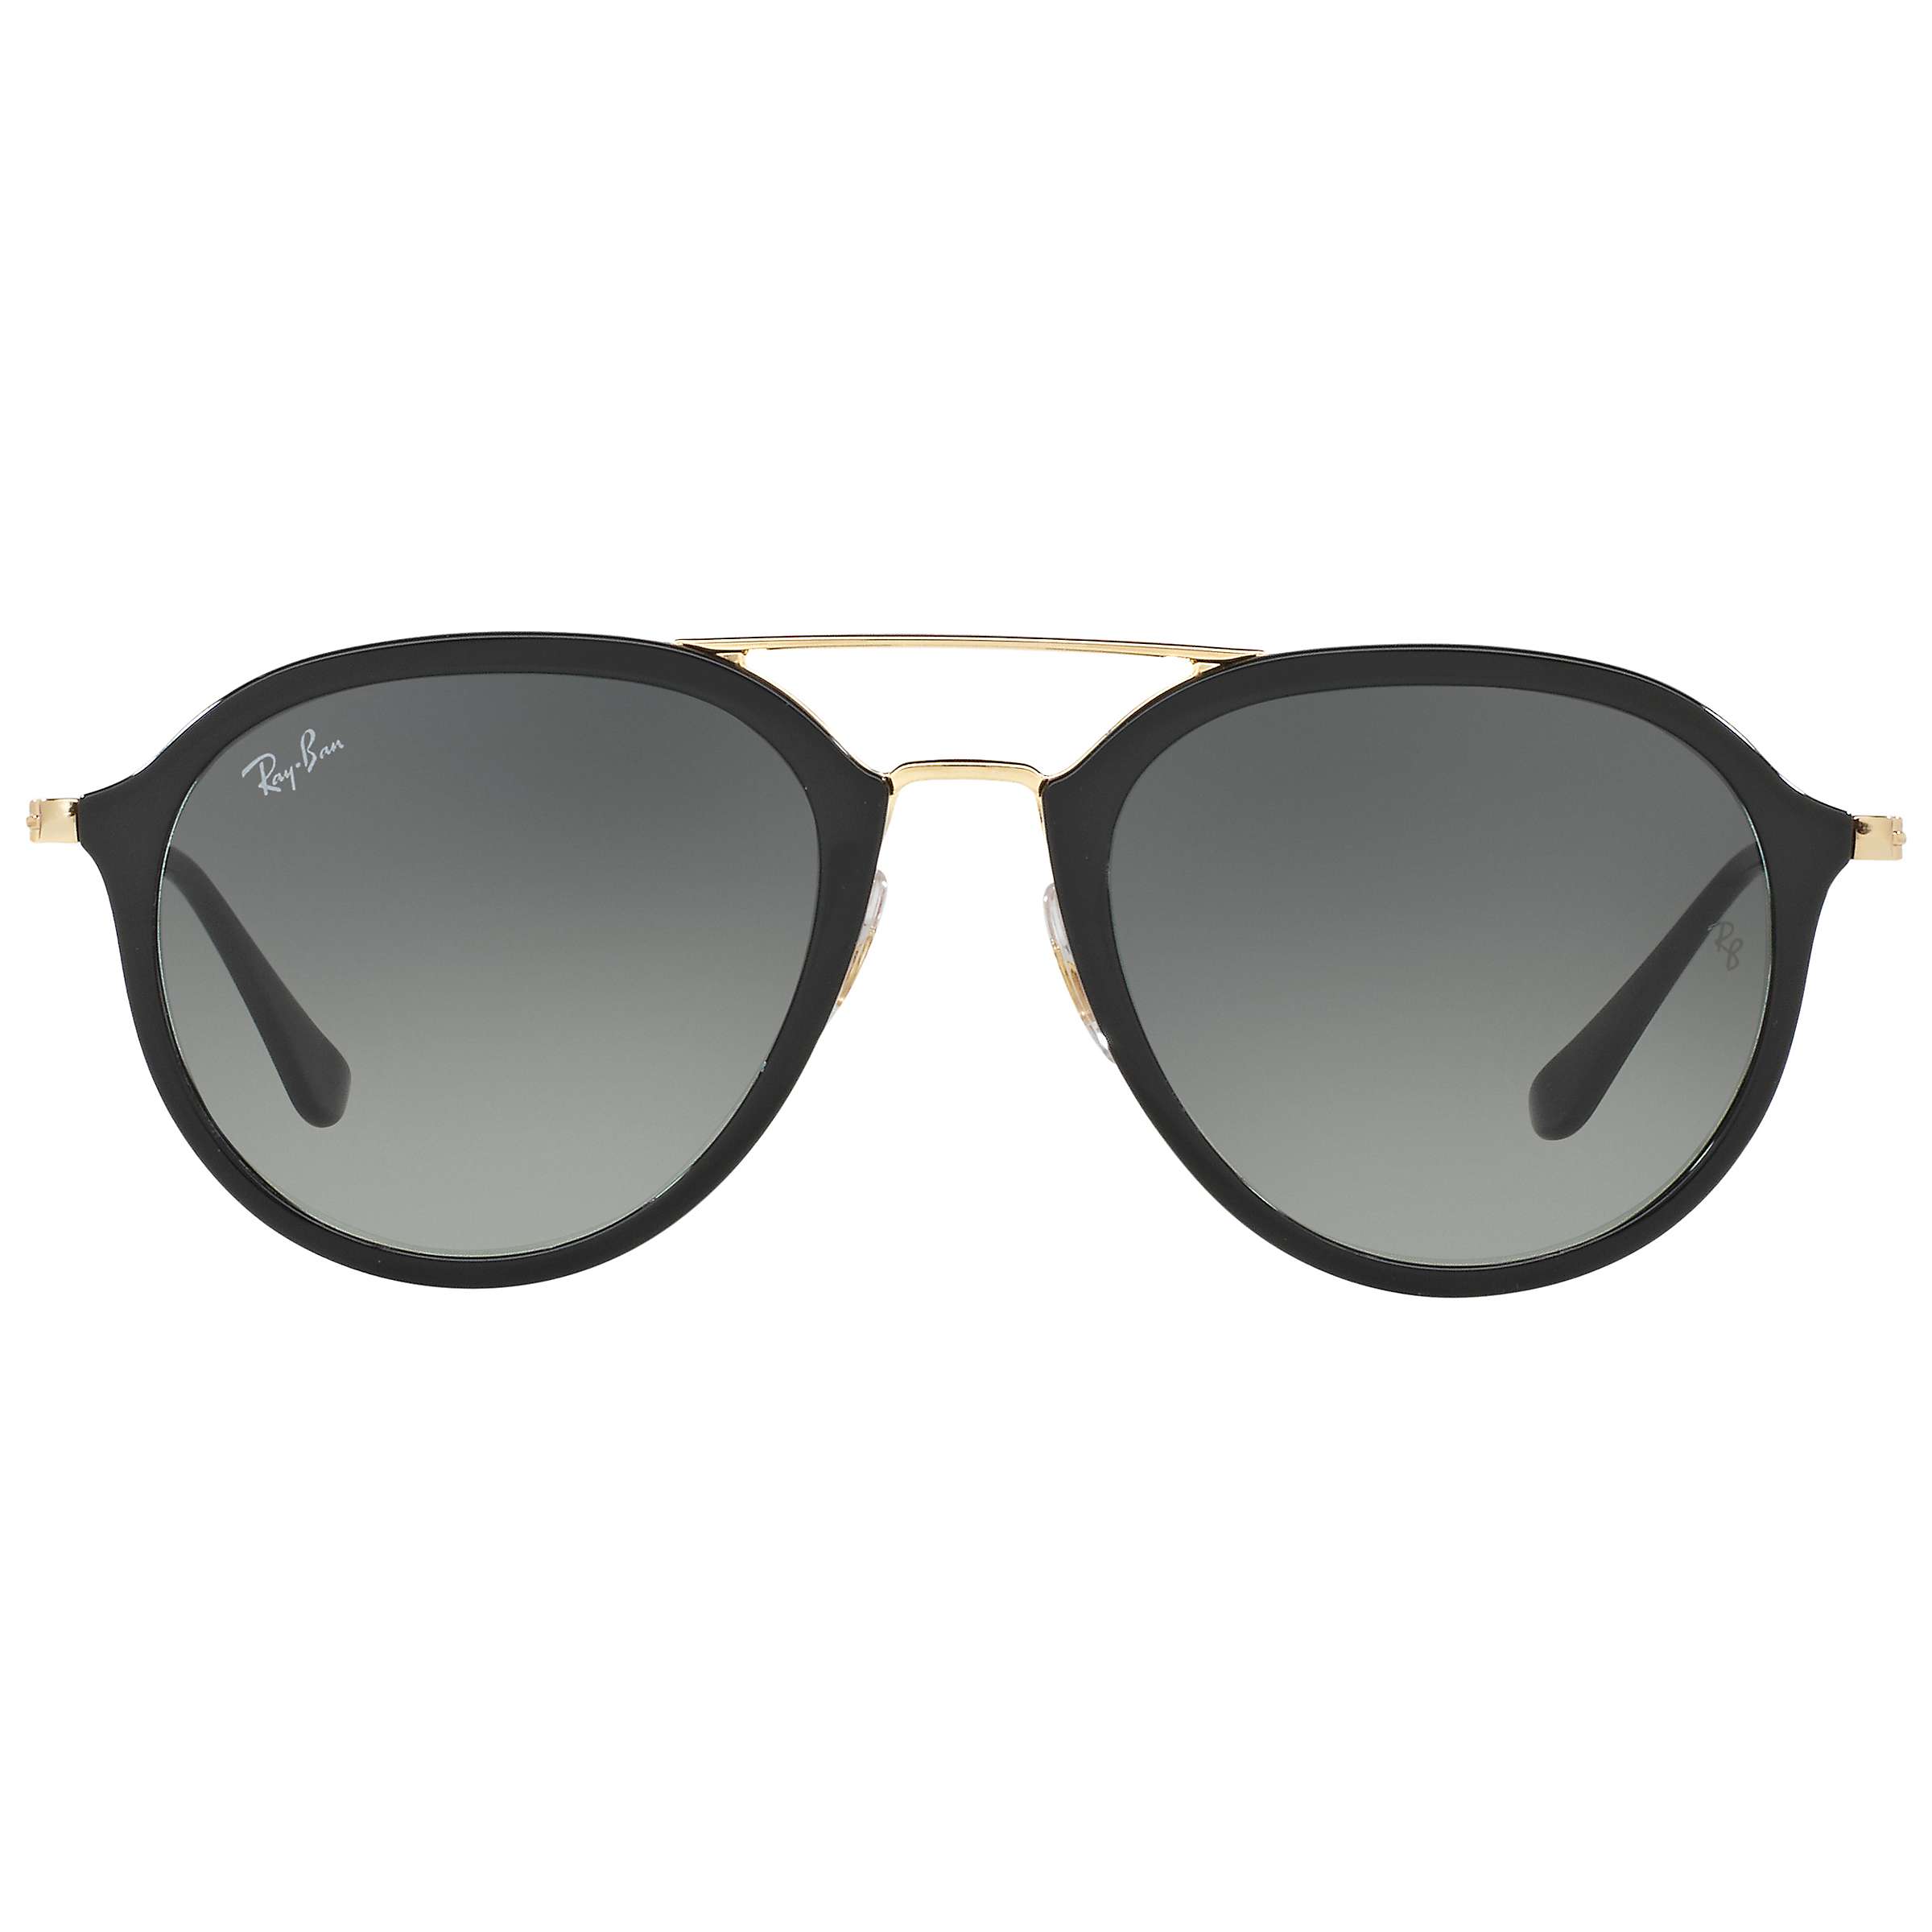 Buy Ray-Ban RB4253 Aviator Sunglasses Online at johnlewis.com